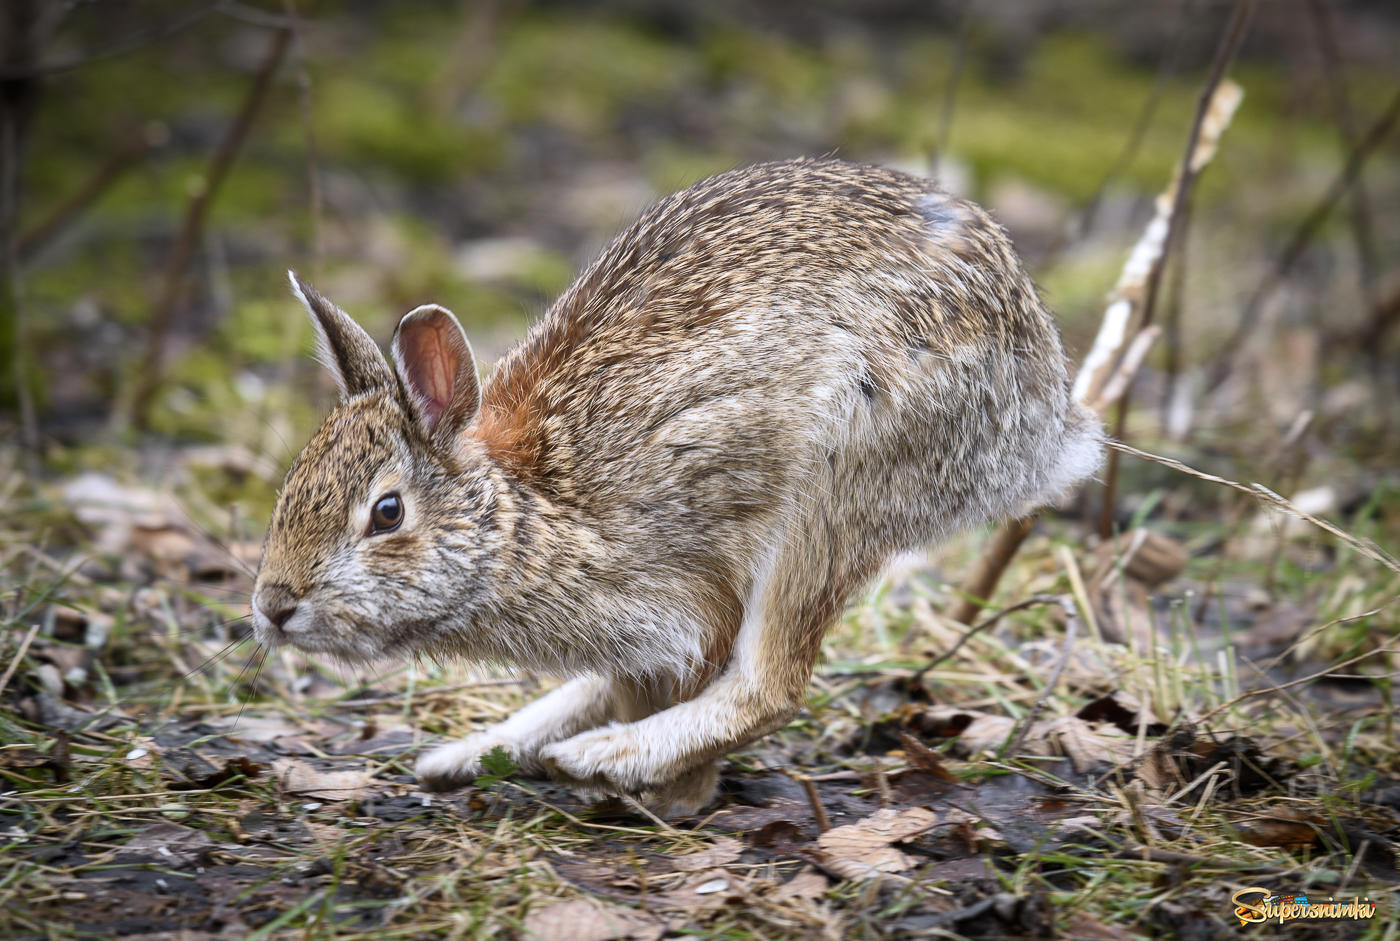 Eastern Cottontail Rabbit (juvinale)